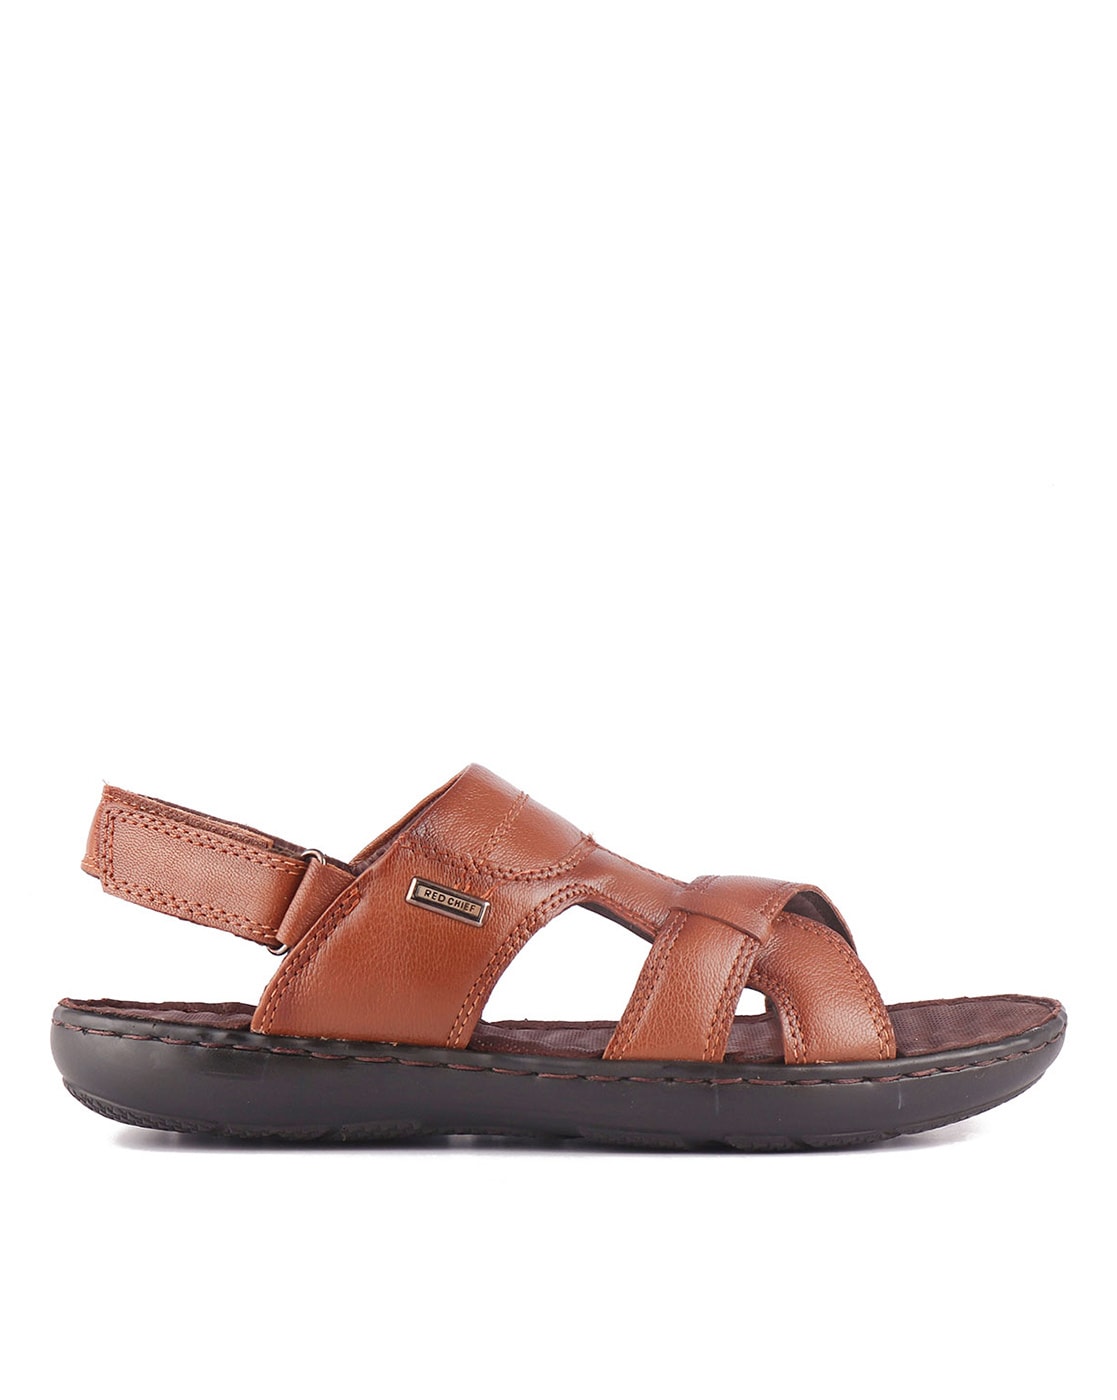 Buy Tan Sandals for Men by RED CHIEF Online | Ajio.com